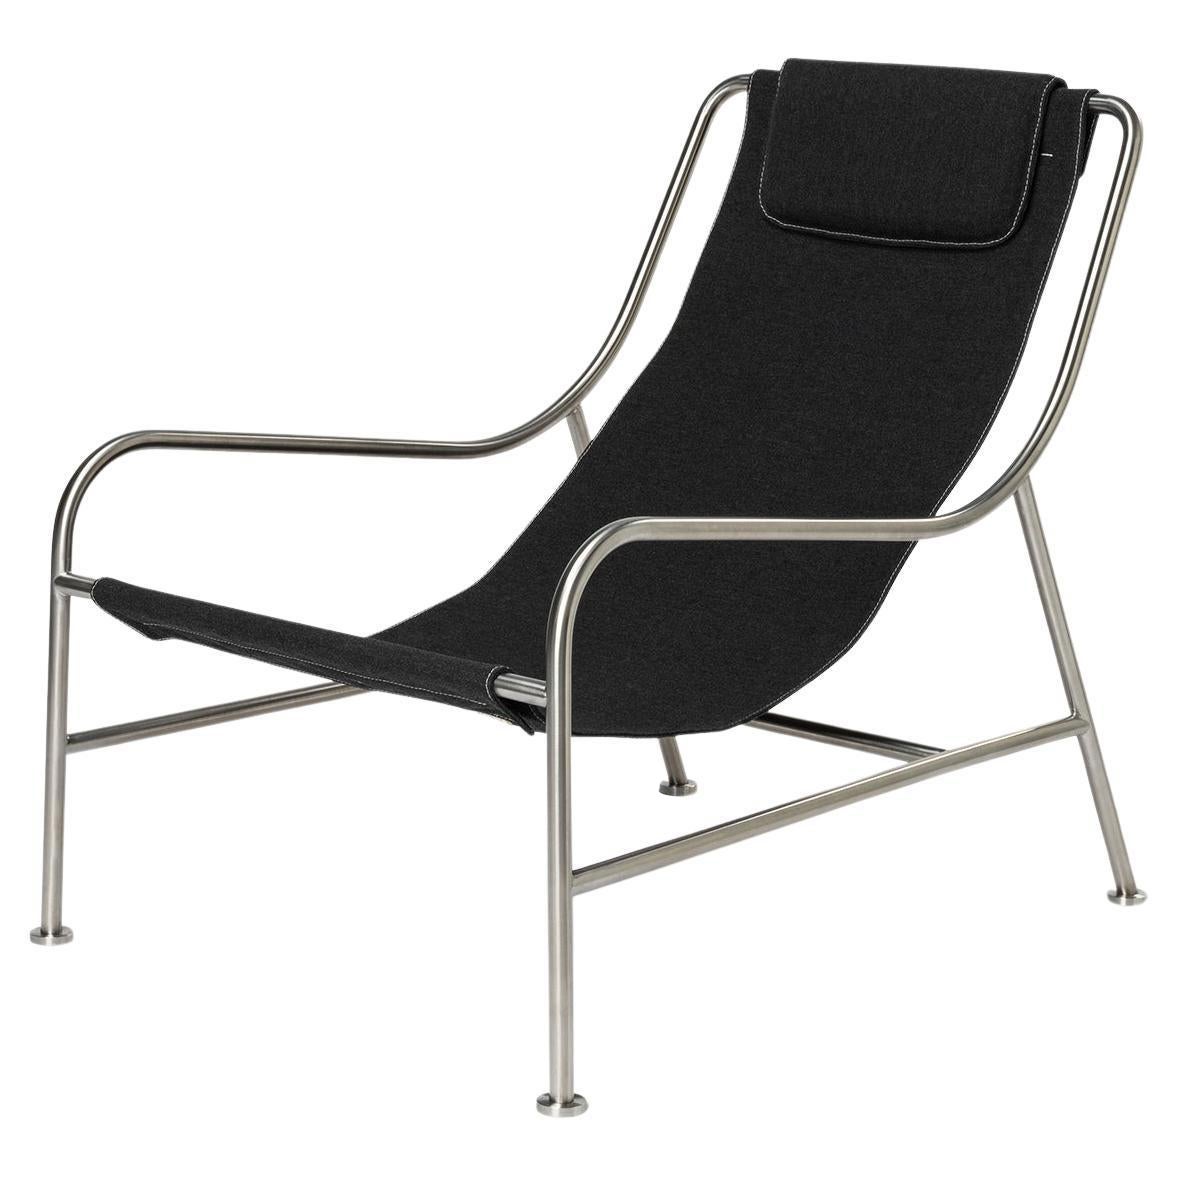 Minimalist Outdoor Lounge Chair in "Char" Fabric and Brushed Stainless Steel For Sale